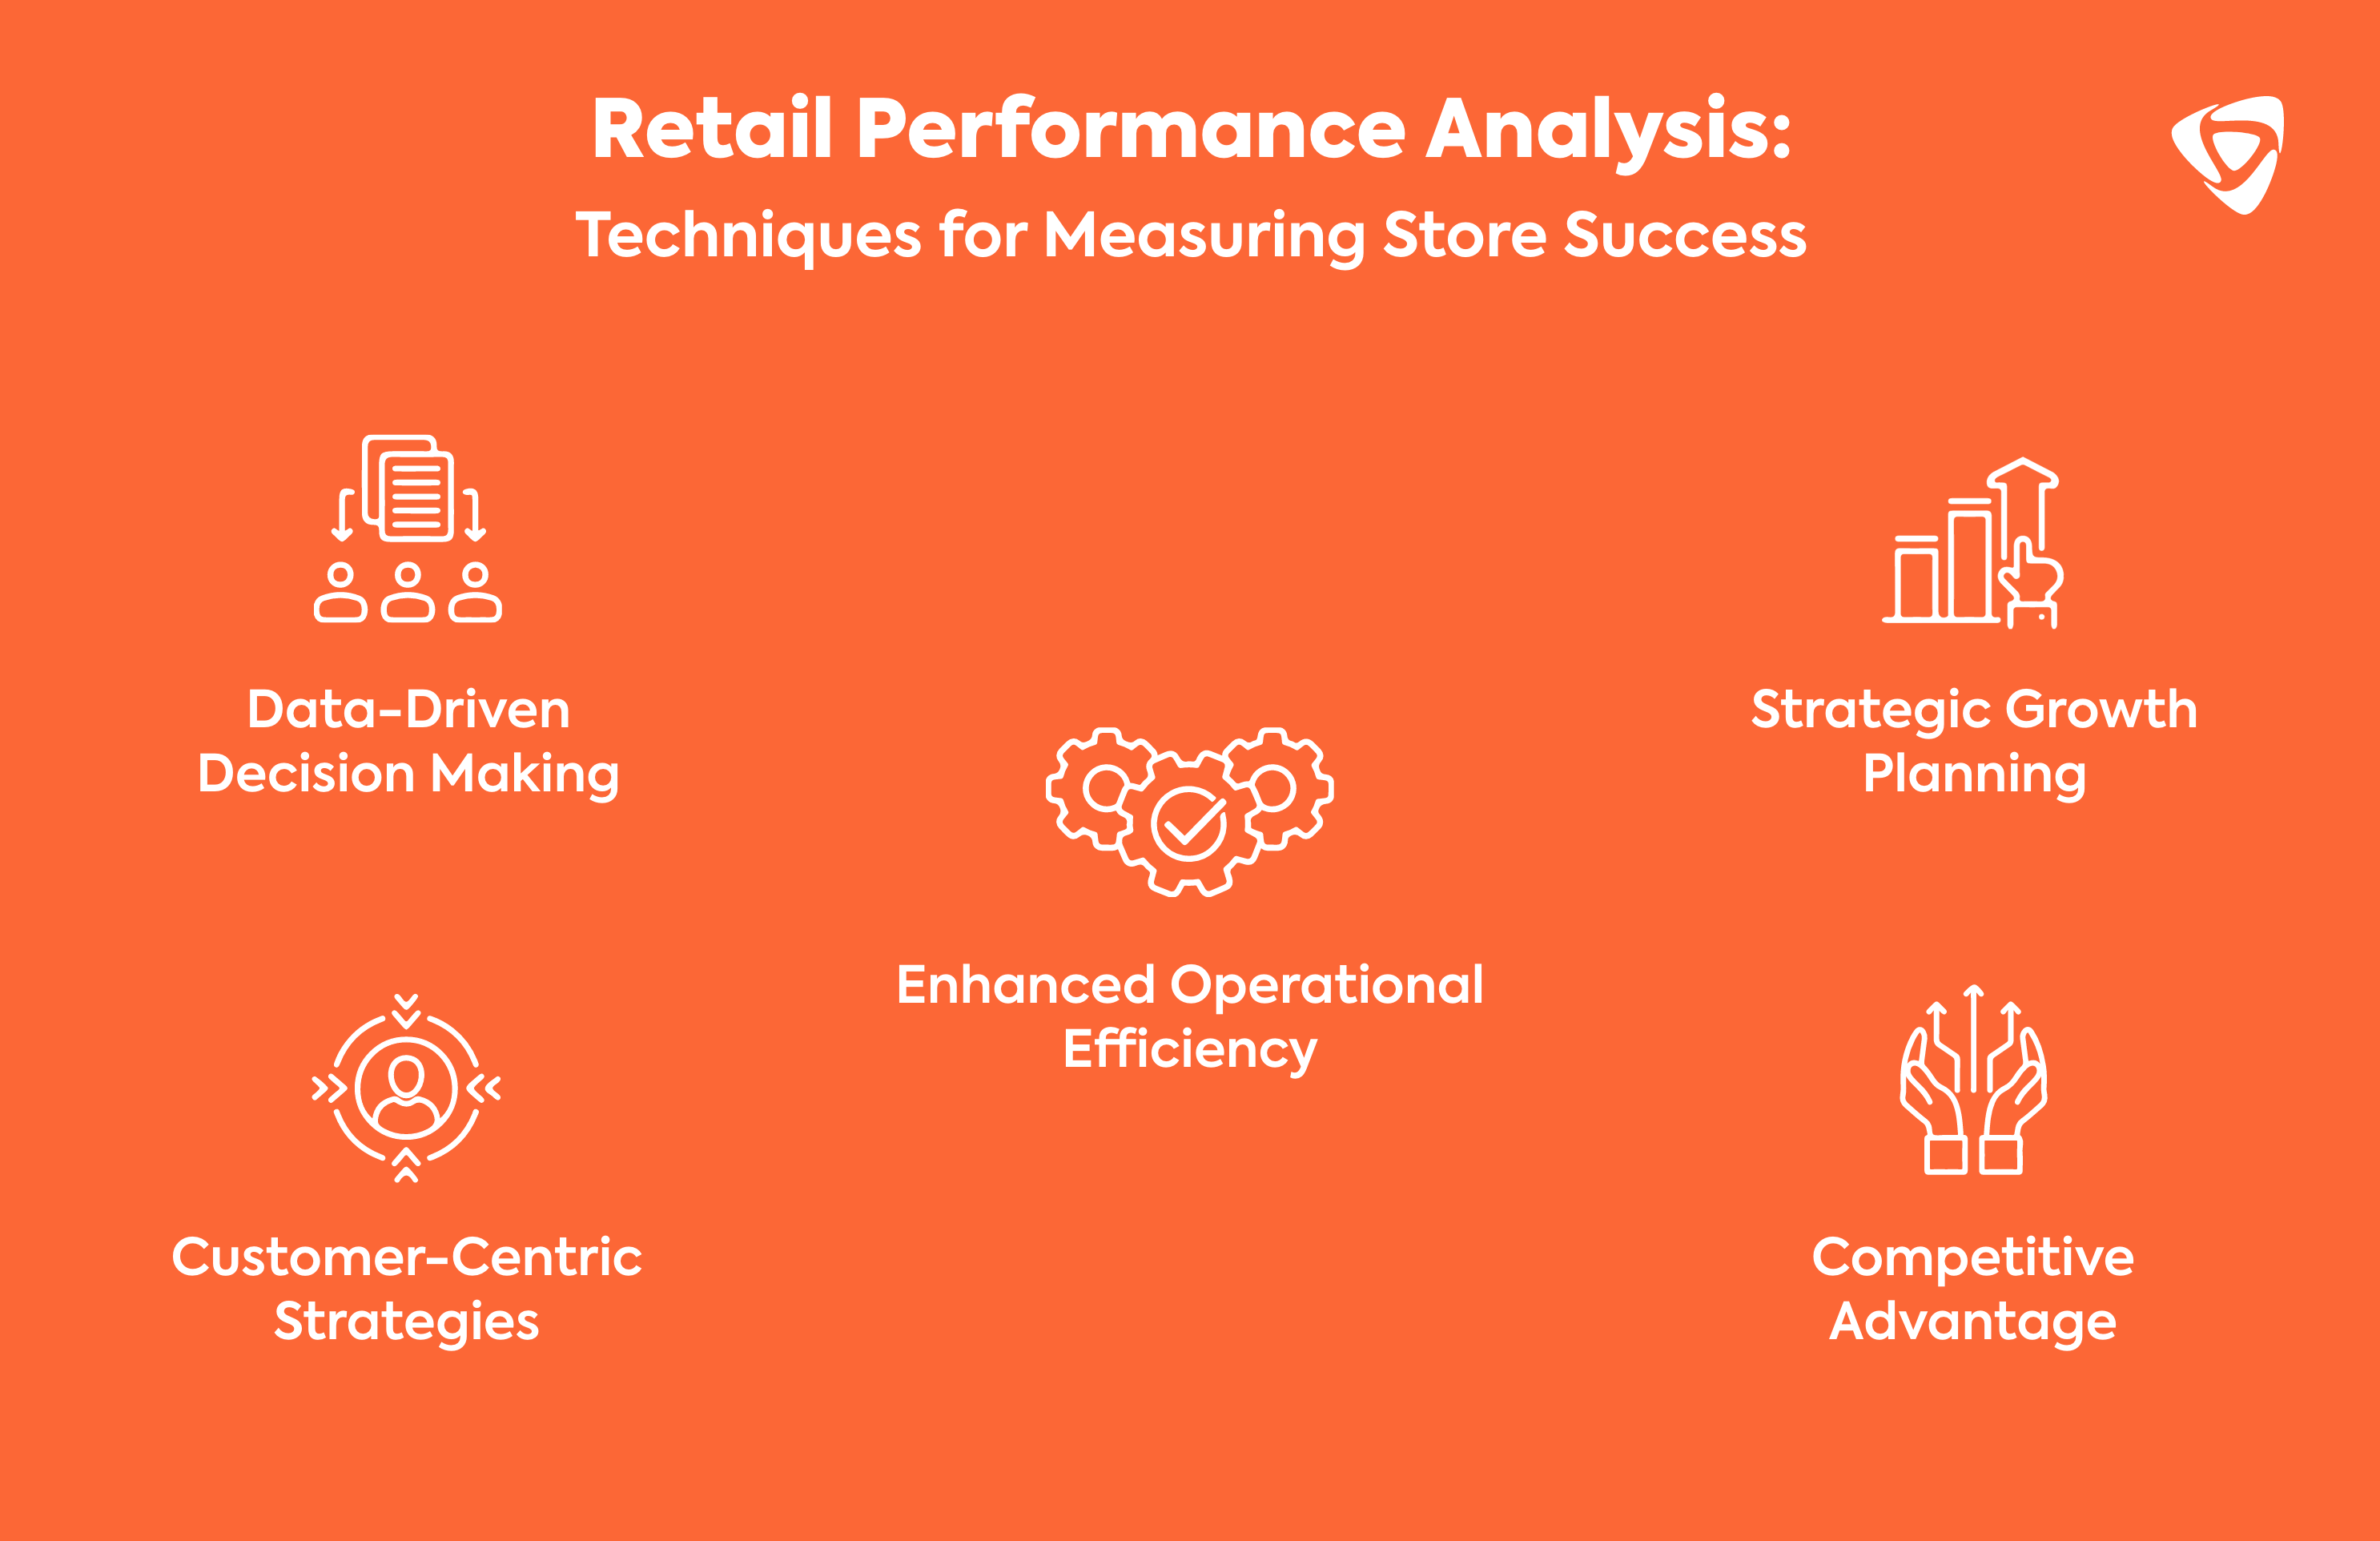 Retail Performance Analysis: Techniques for Measuring Store Success